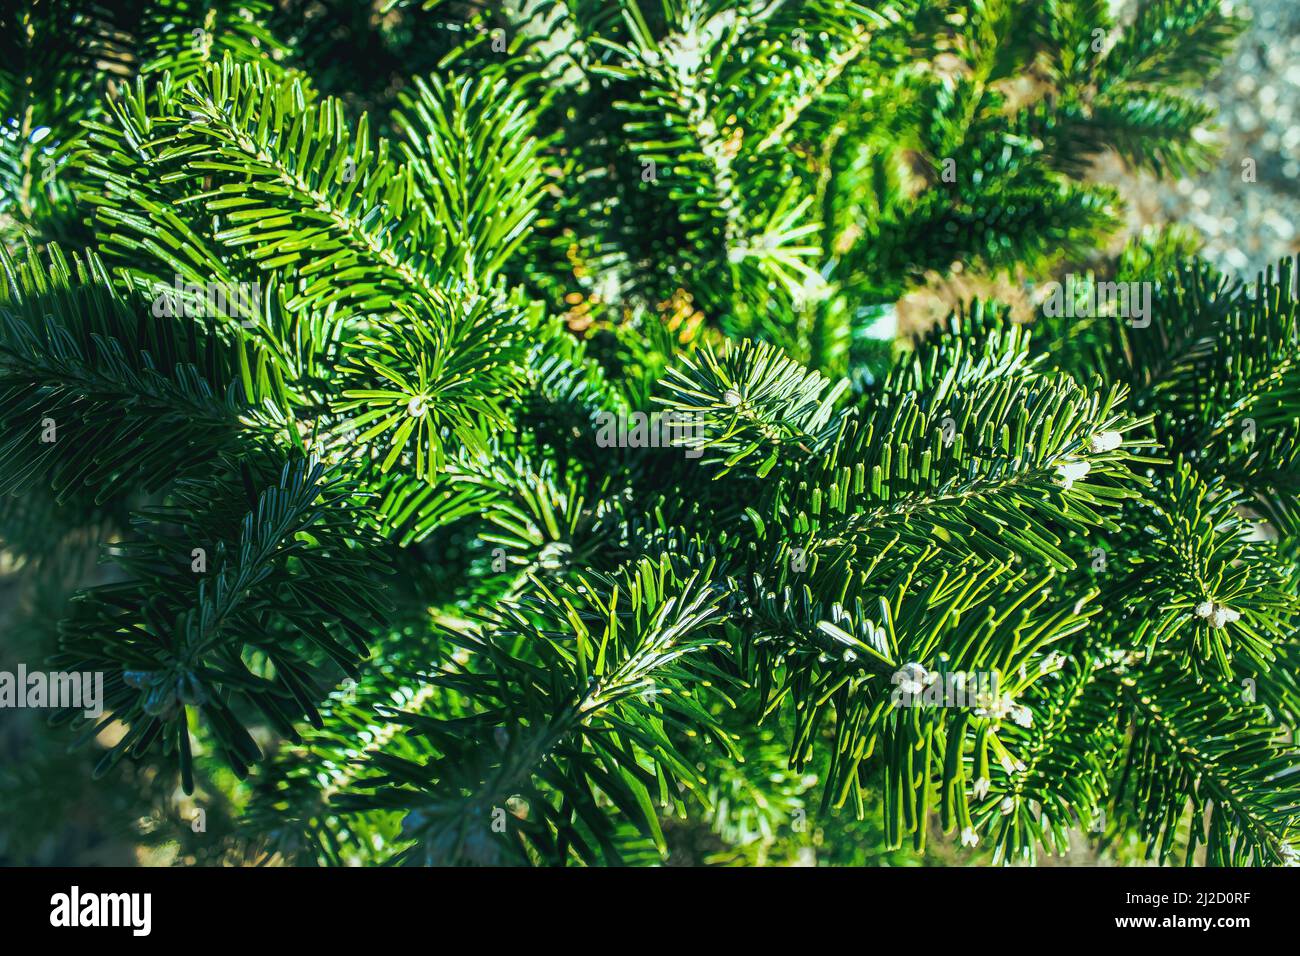 Small white patterns can be seen on the pine needles of this serbian spruce. Stock Photo